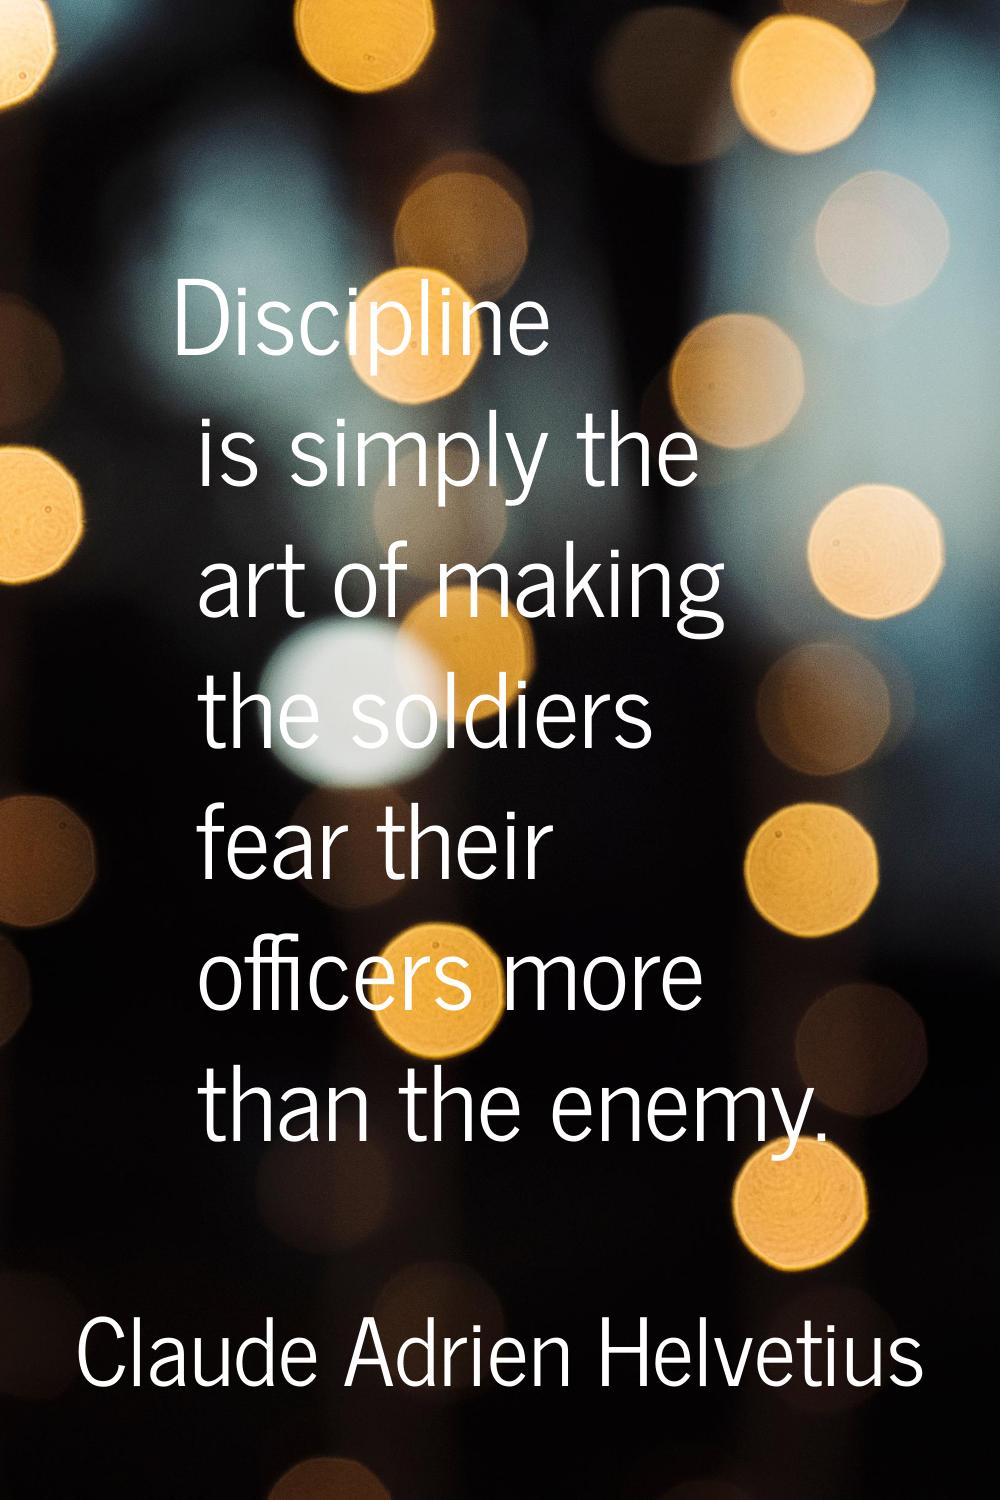 Discipline is simply the art of making the soldiers fear their officers more than the enemy.